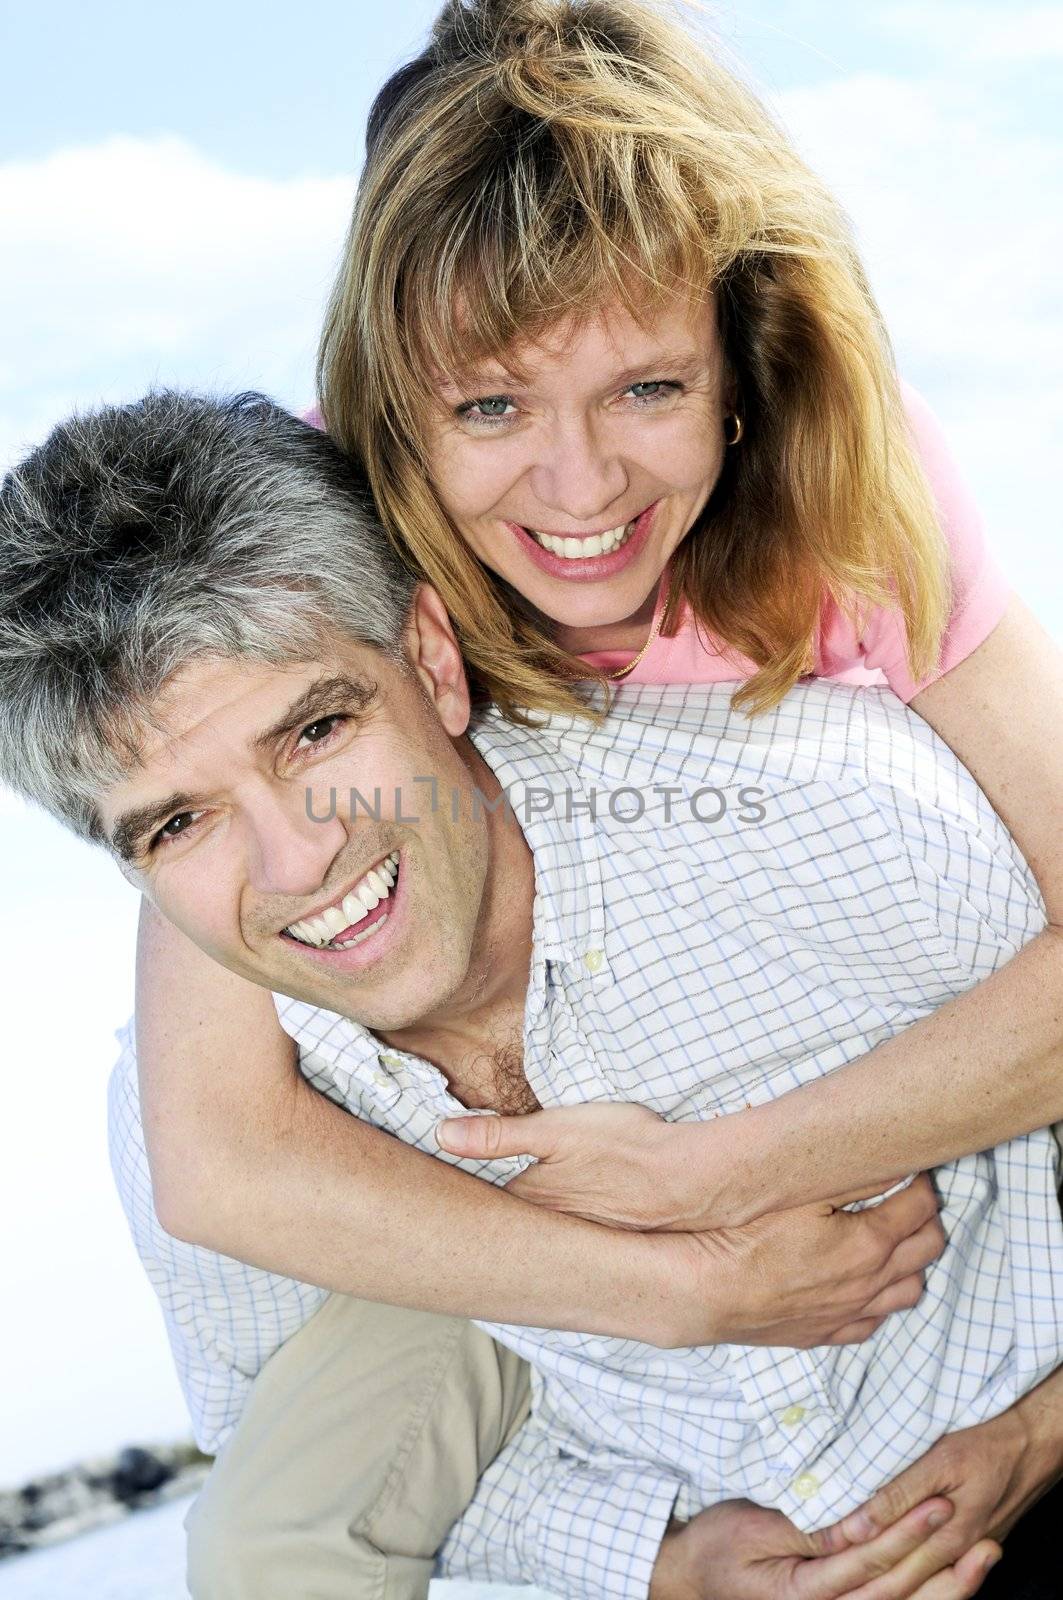 Mature romantic couple of baby boomers enjoying outdoors